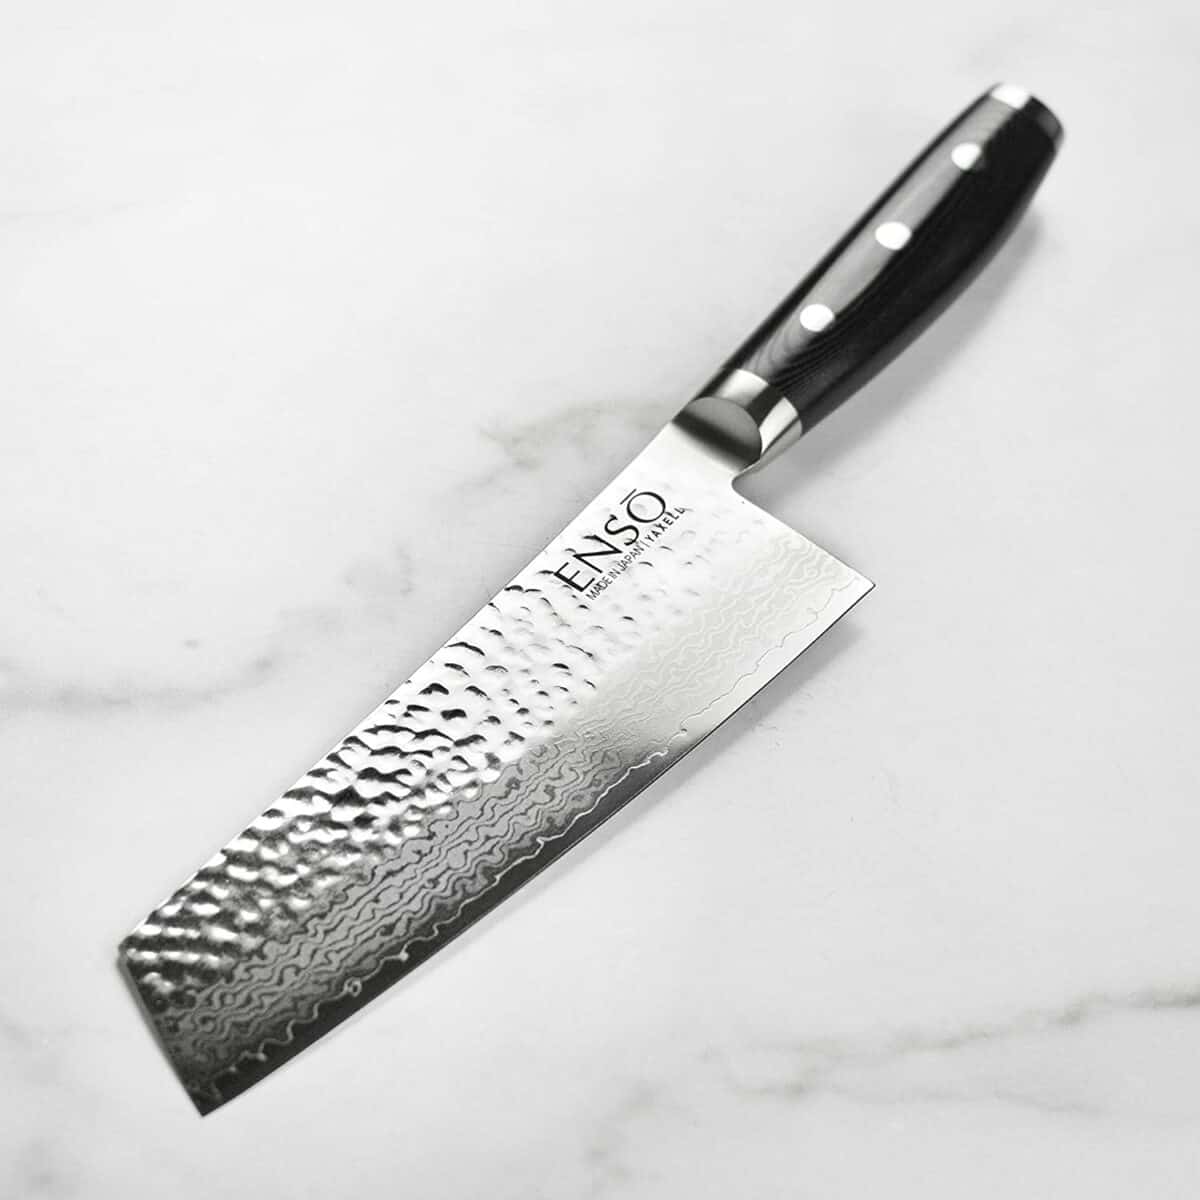 Enso HD 7 Bunka Knife - Made in Japan - VG10 Hammered Damascus Stainless Steel